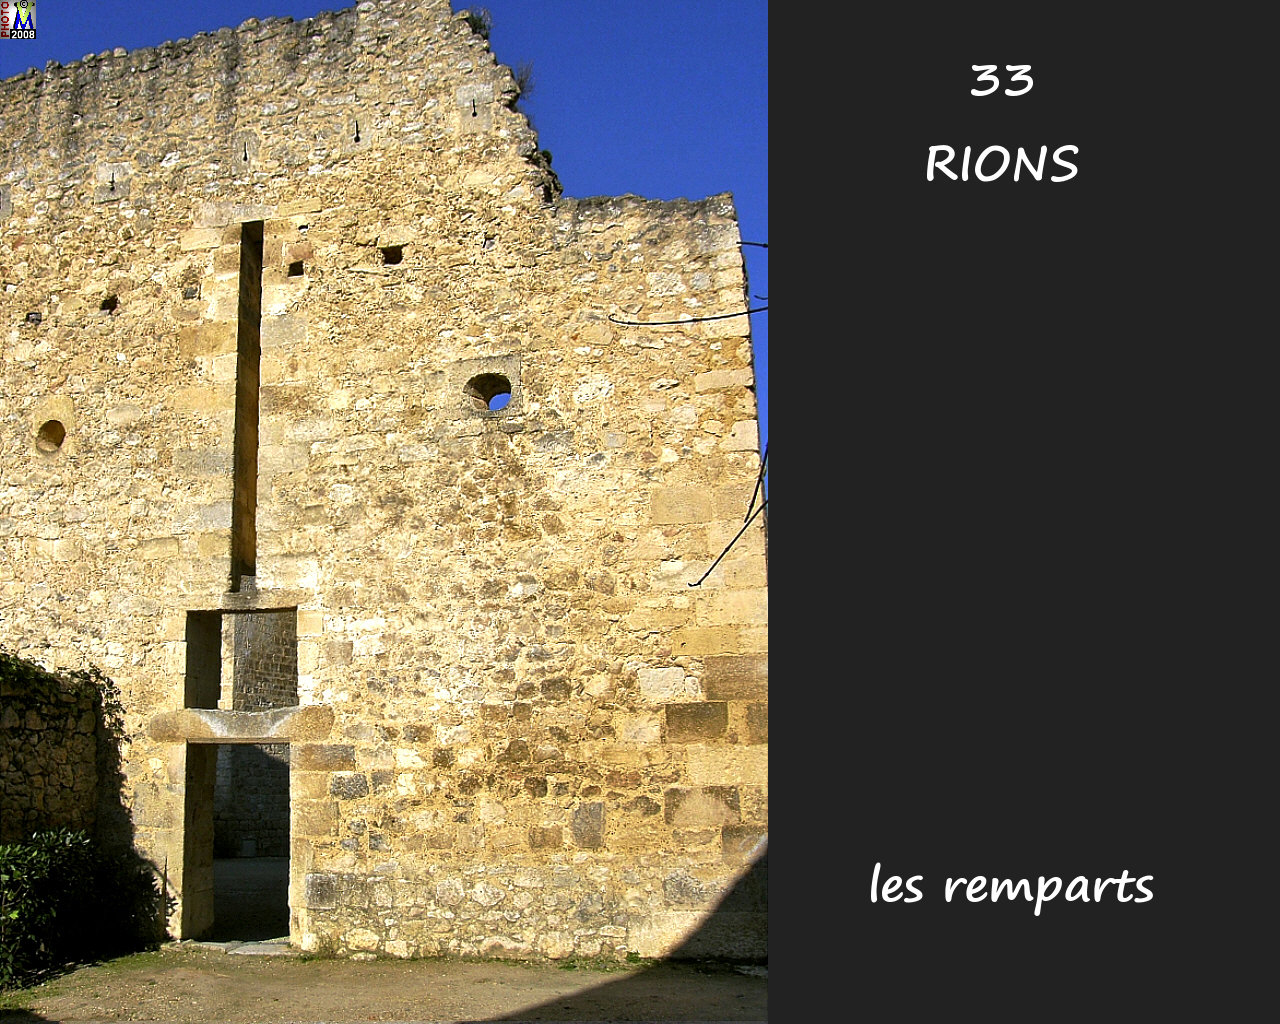 33RIONS_remparts_102.jpg